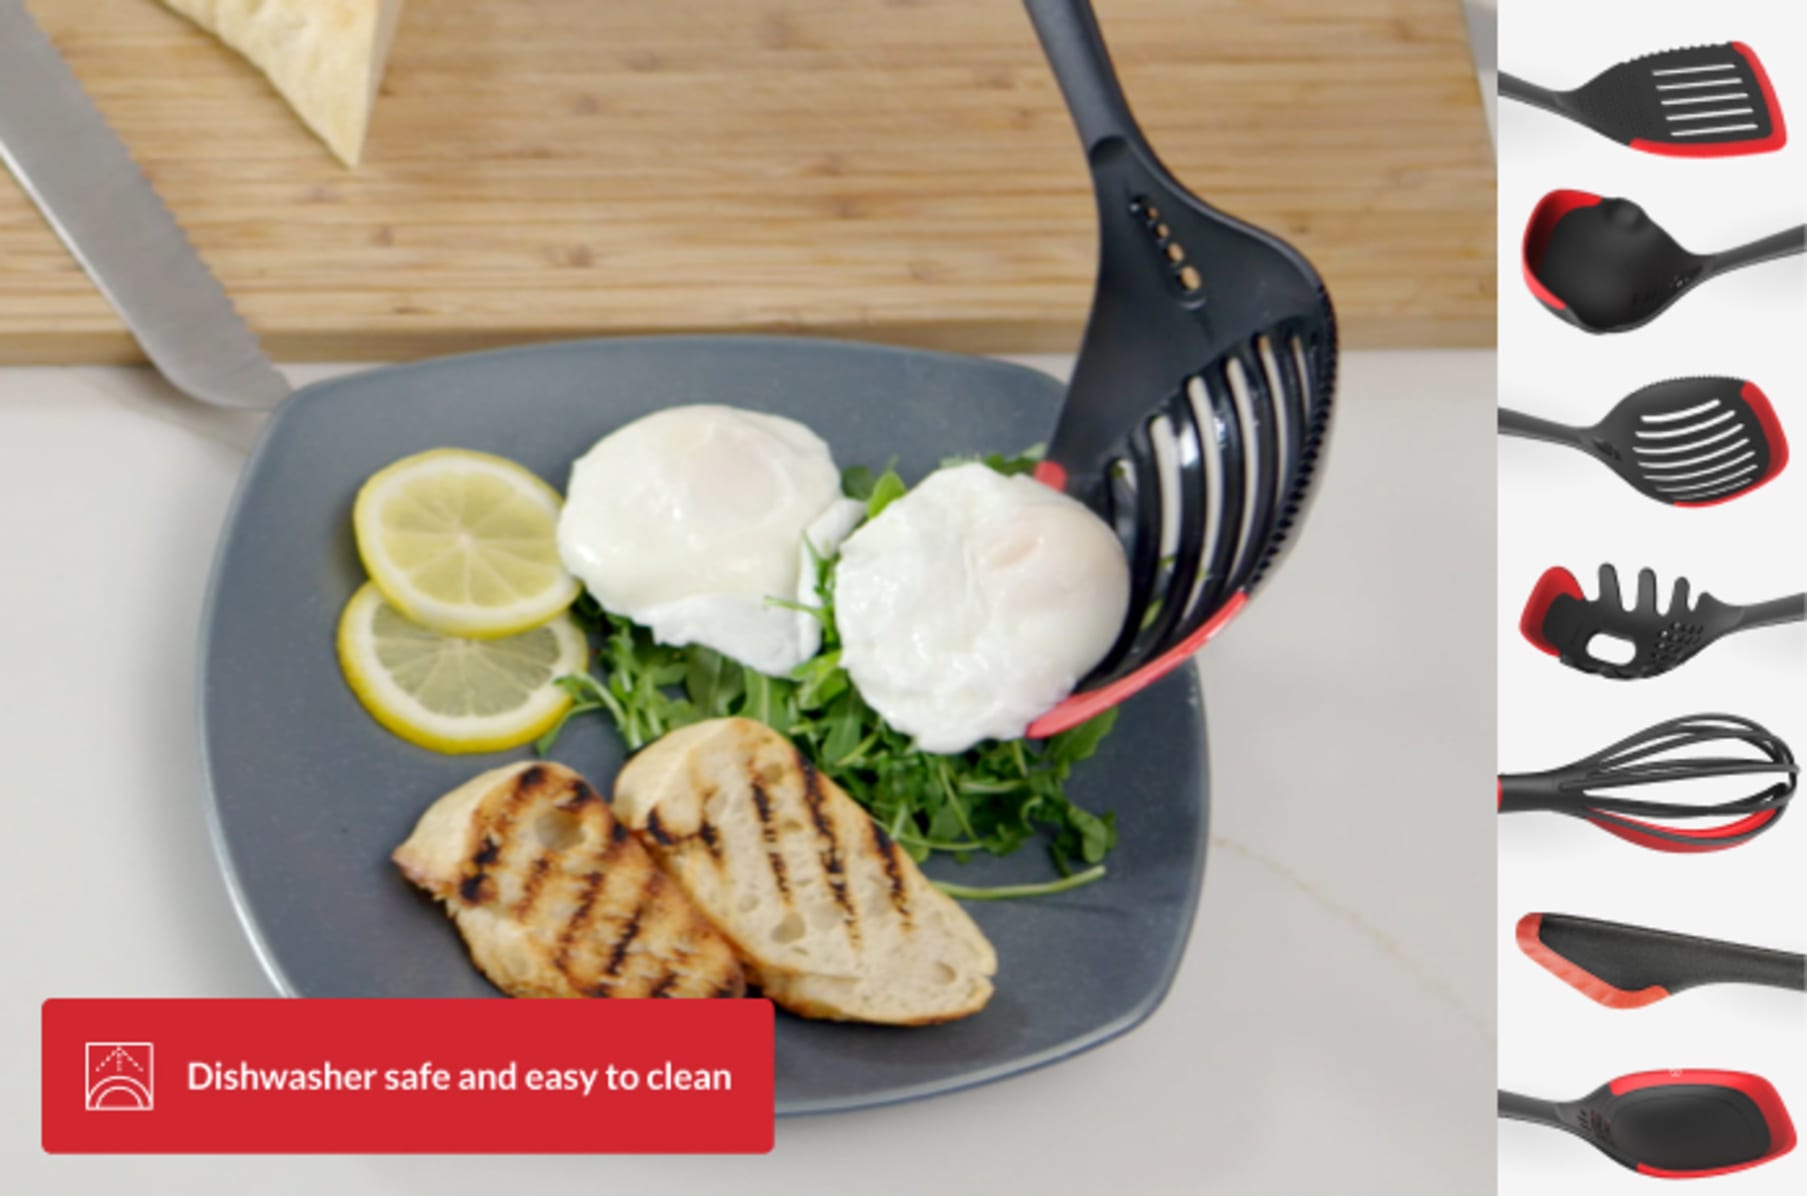 7pcs/set Heat-resistant Silicone Kitchen Cooking Utensils, Including  Spatula, Spoon, Skimmer, Suitable For Non-stick Cookware, Dishwasher Safe